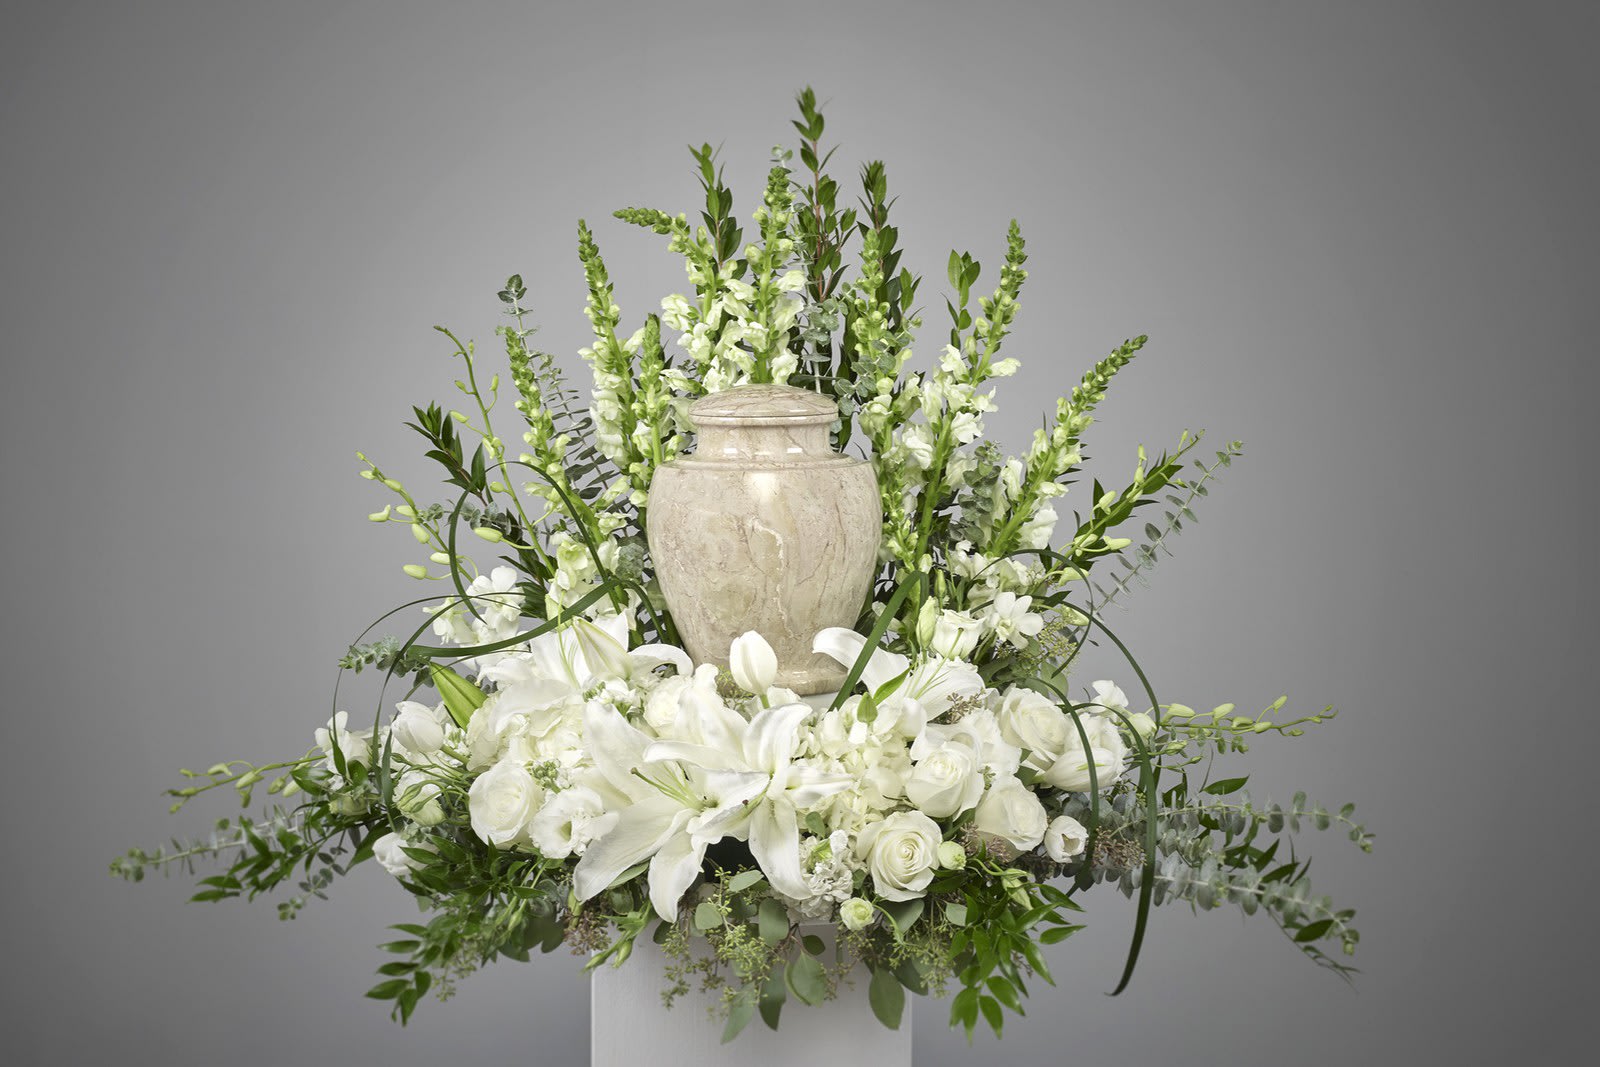 Exquisite Luxury White Cremation Floral - This upscale design is filled with high quality lush flowers and greens. Perfect to adorn the Urn of your loved one.